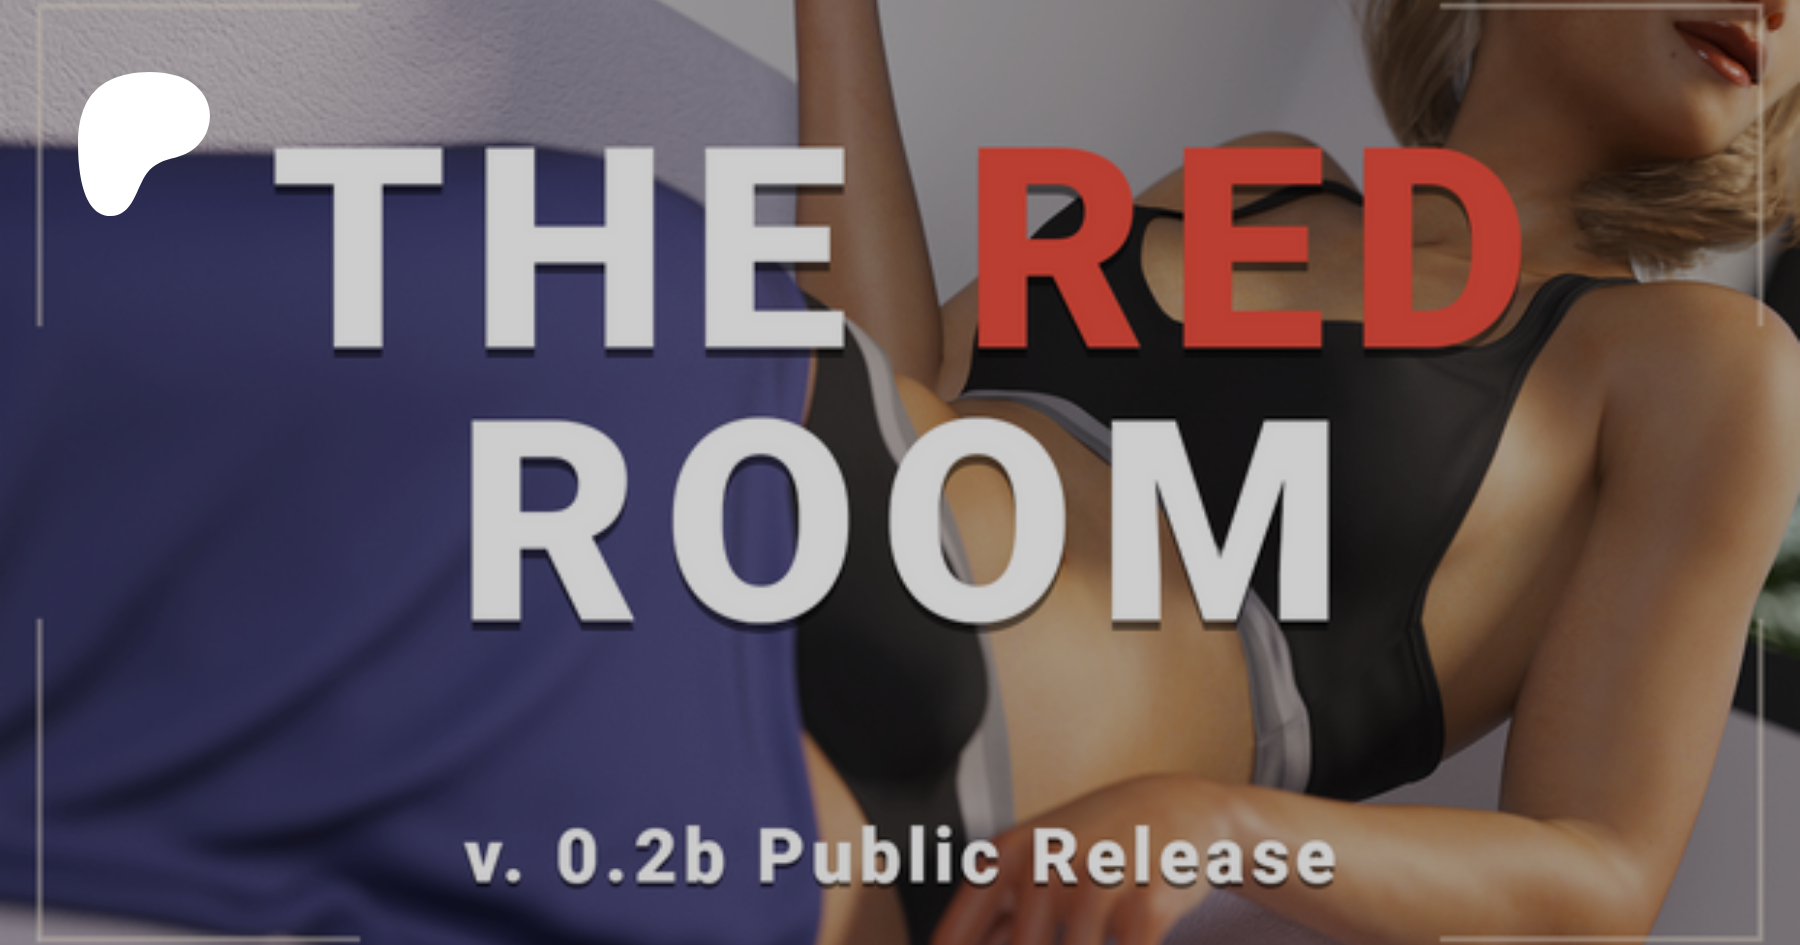 The red room patreon